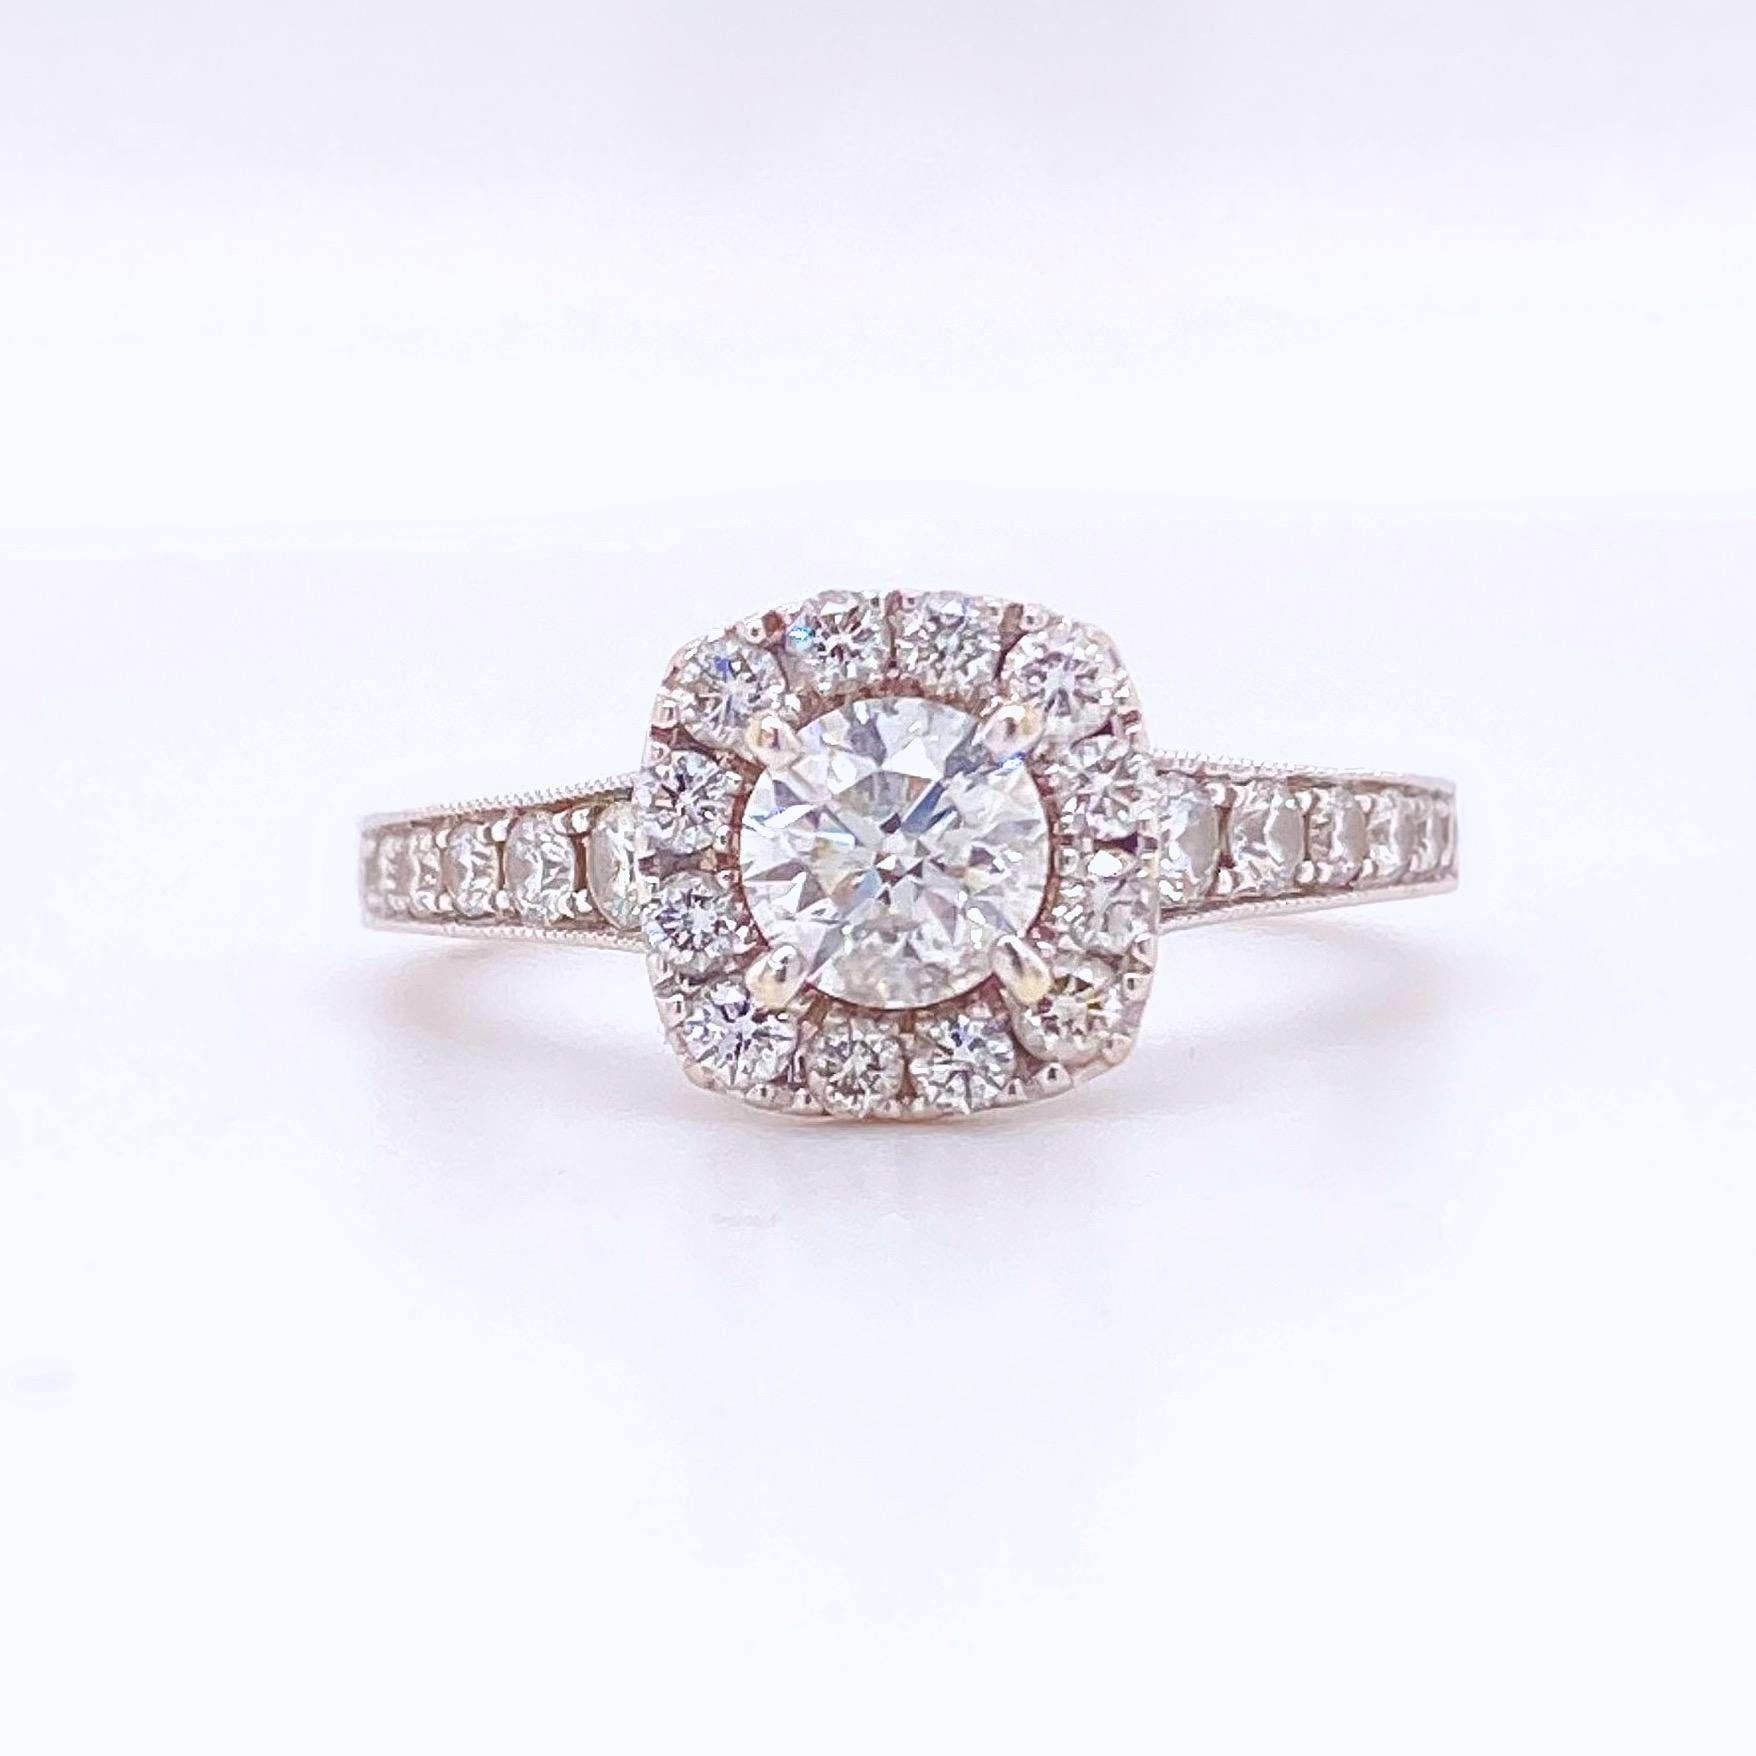 Neil Lane Bridal Halo Diamond Engagement Ring
Style:  Halo
Ref. number:  #940296015
Metal:  14k White Gold
Size:  7 sizable
TCW:  1 1/6 tcw / 1.16 tcw
Main Diamond:  Round Diamond 0.62 cts / 5/8 cts
Color & Clarity:  I / I1
Accent Diamonds:   Round